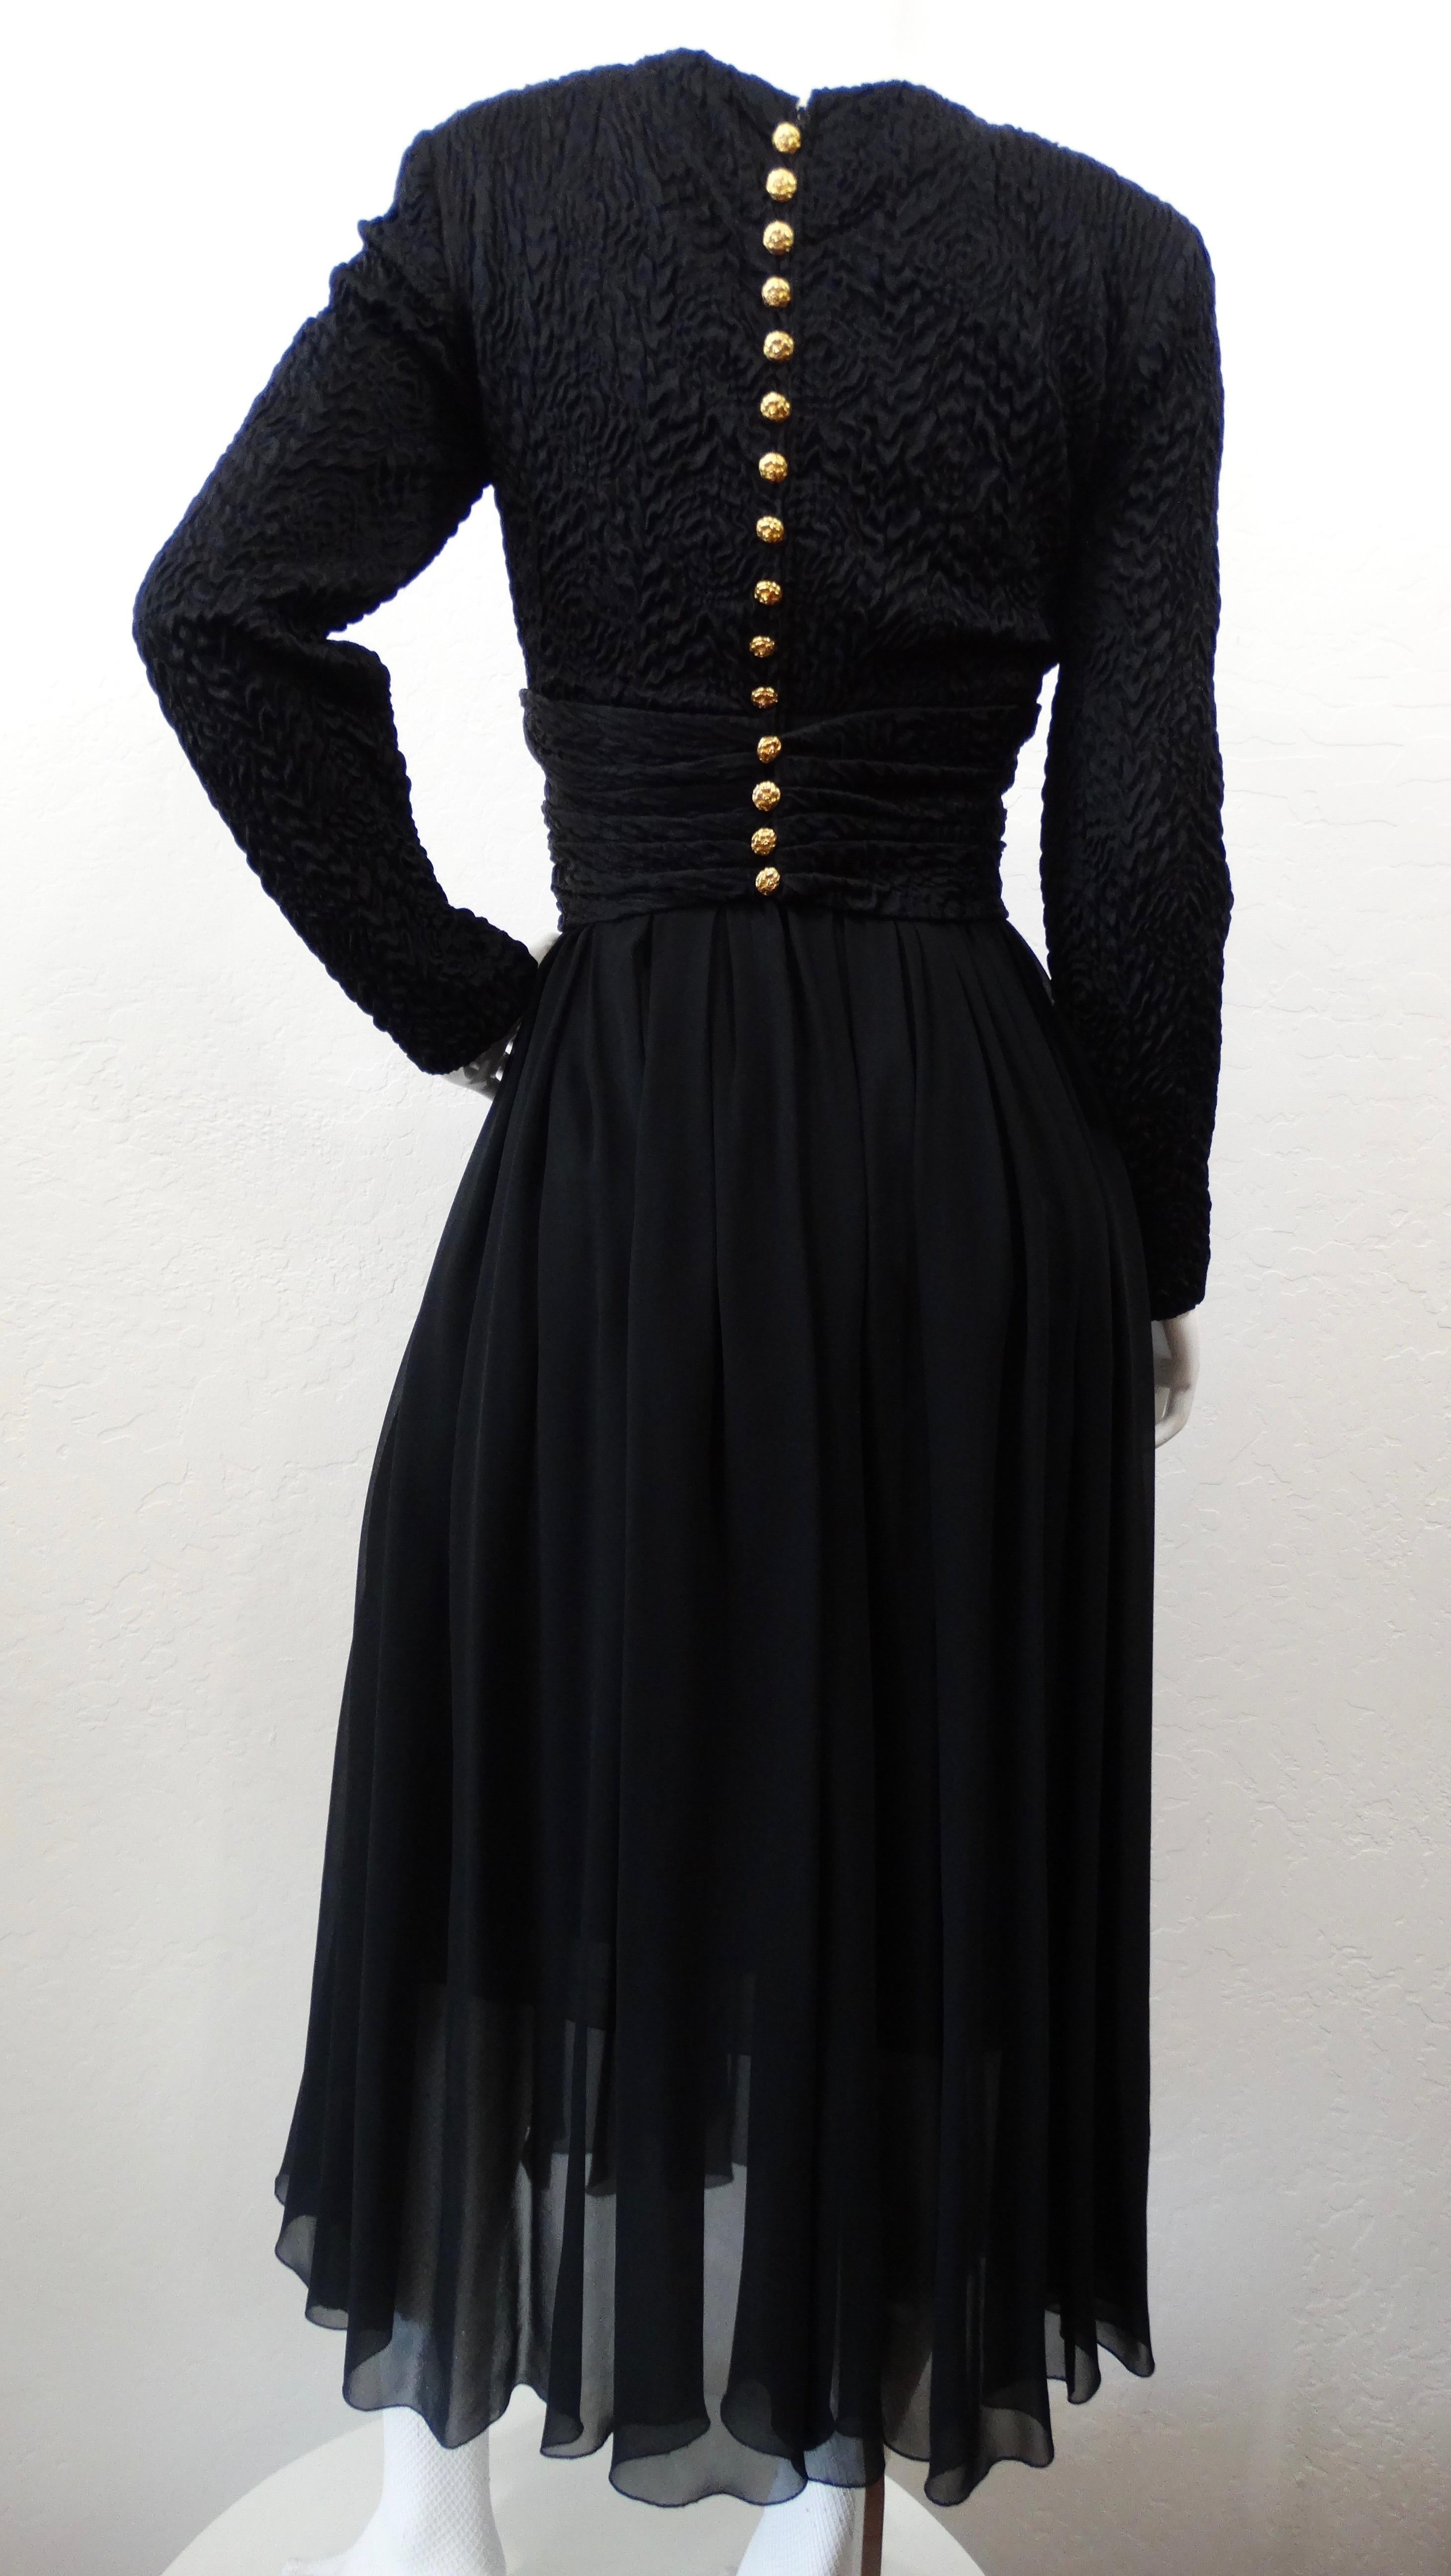 Chanel Boutique 1980s Black Evening Dress  In Good Condition For Sale In Scottsdale, AZ